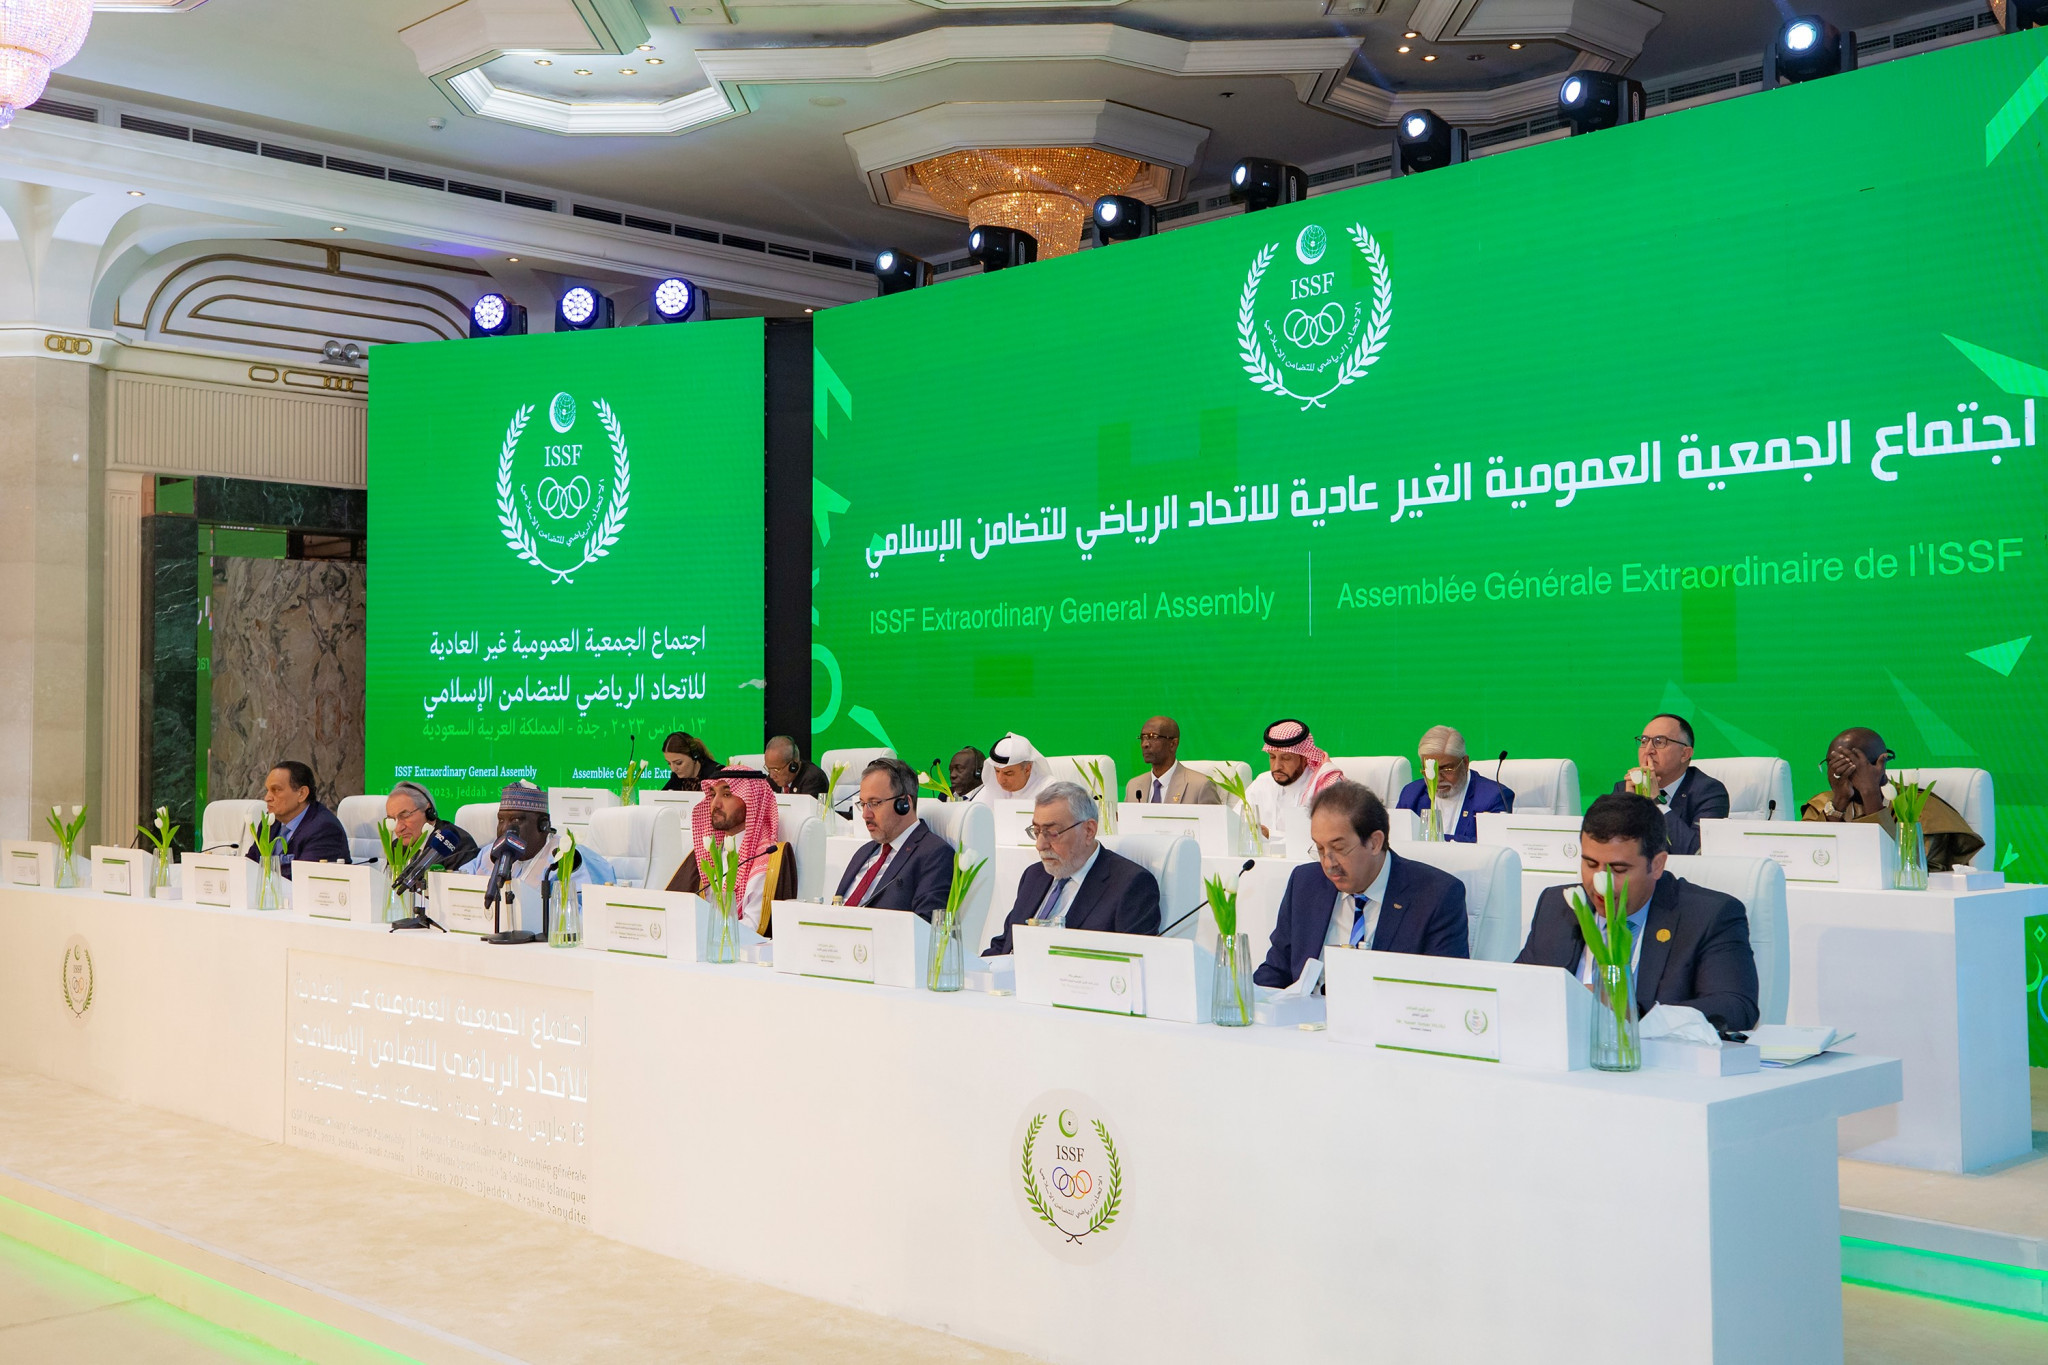 Konya 2021 and Qatar 2022 praised at ISSF Extraordinary General Assembly